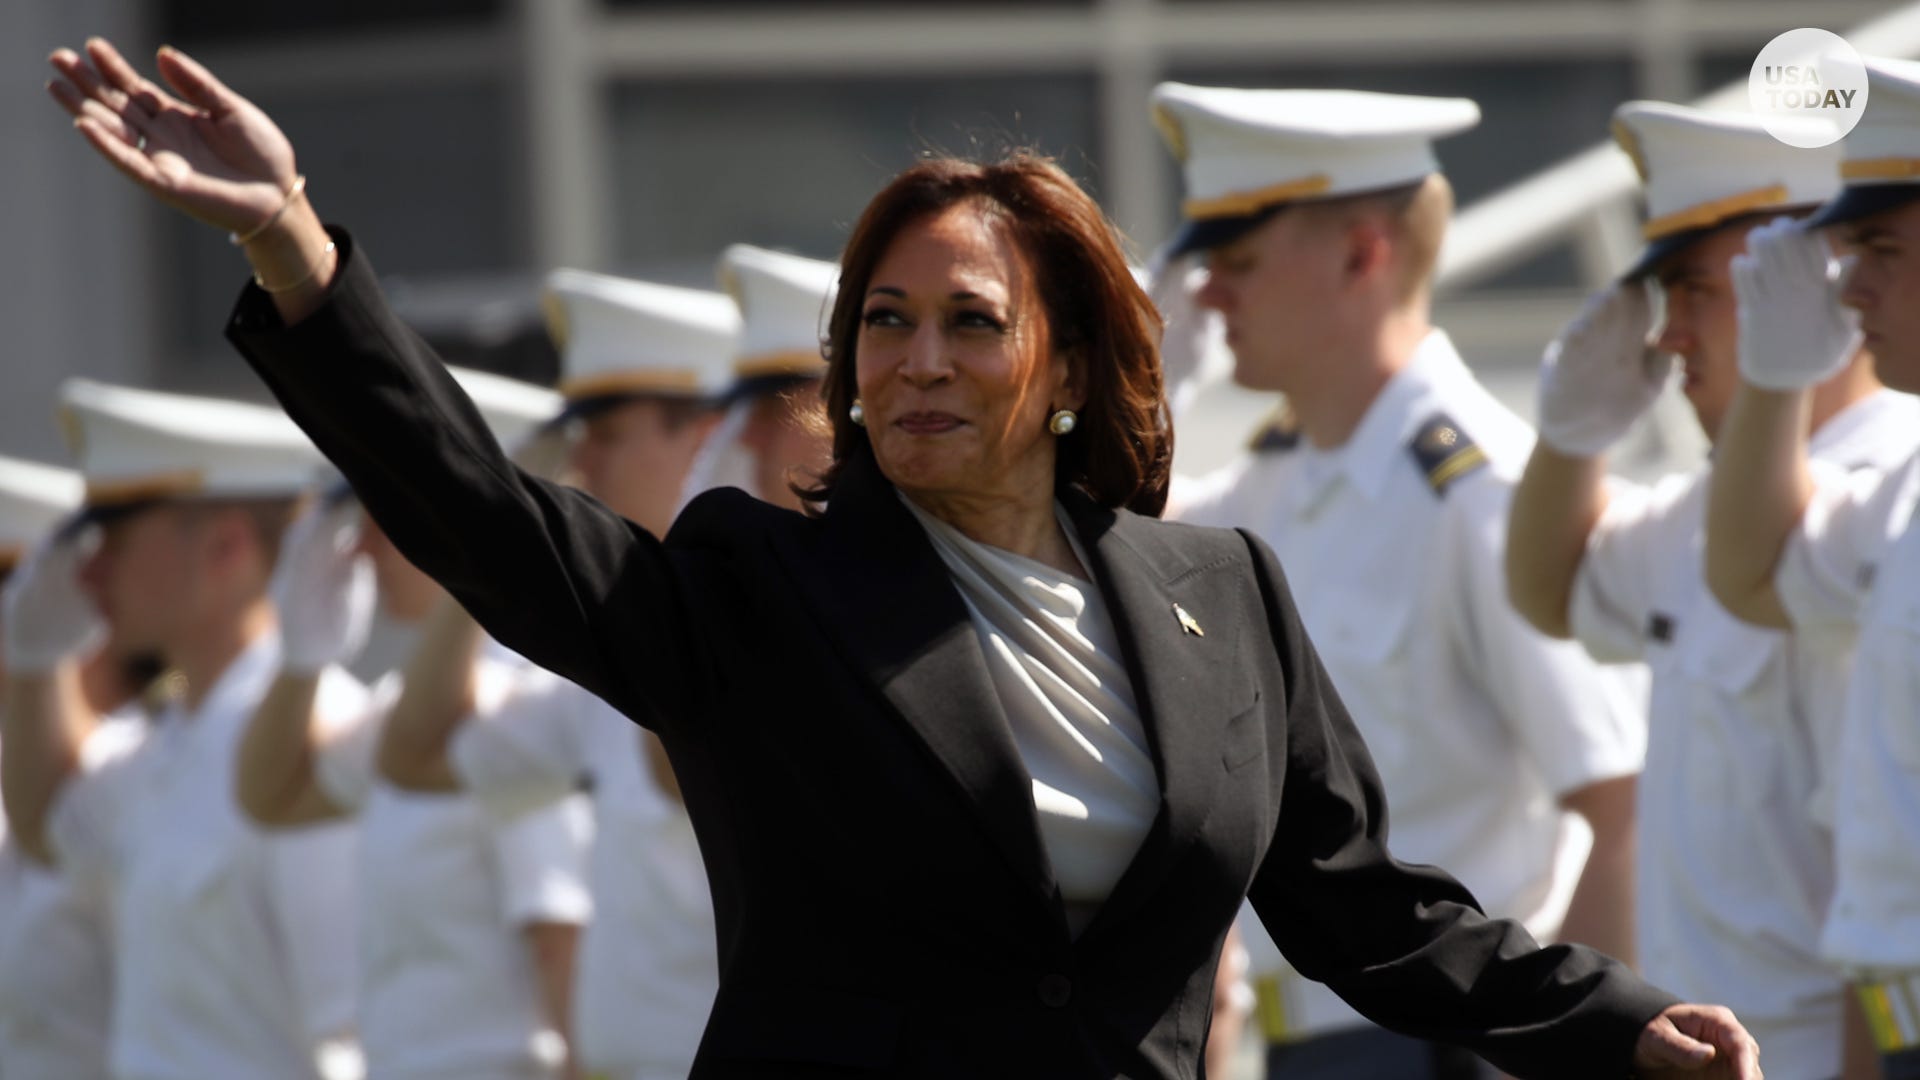 Kamala Harris makes history as first woman delivering commencement speech at West Point